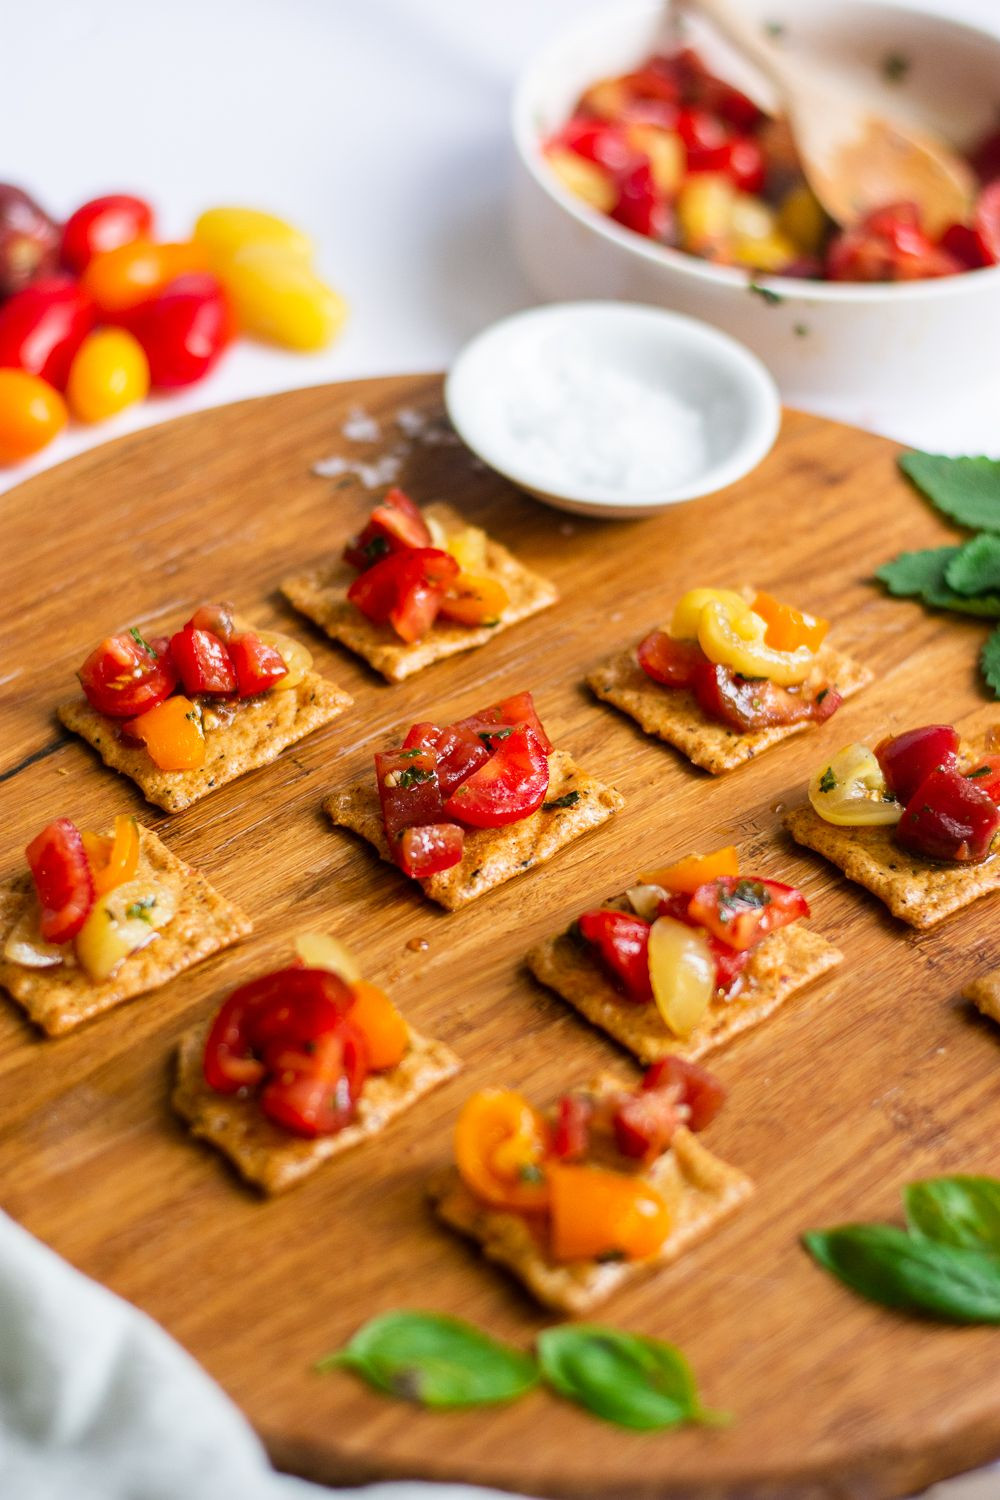 Top 15 Vegan Gluten Free Appetizers Of All Time How To Make Perfect